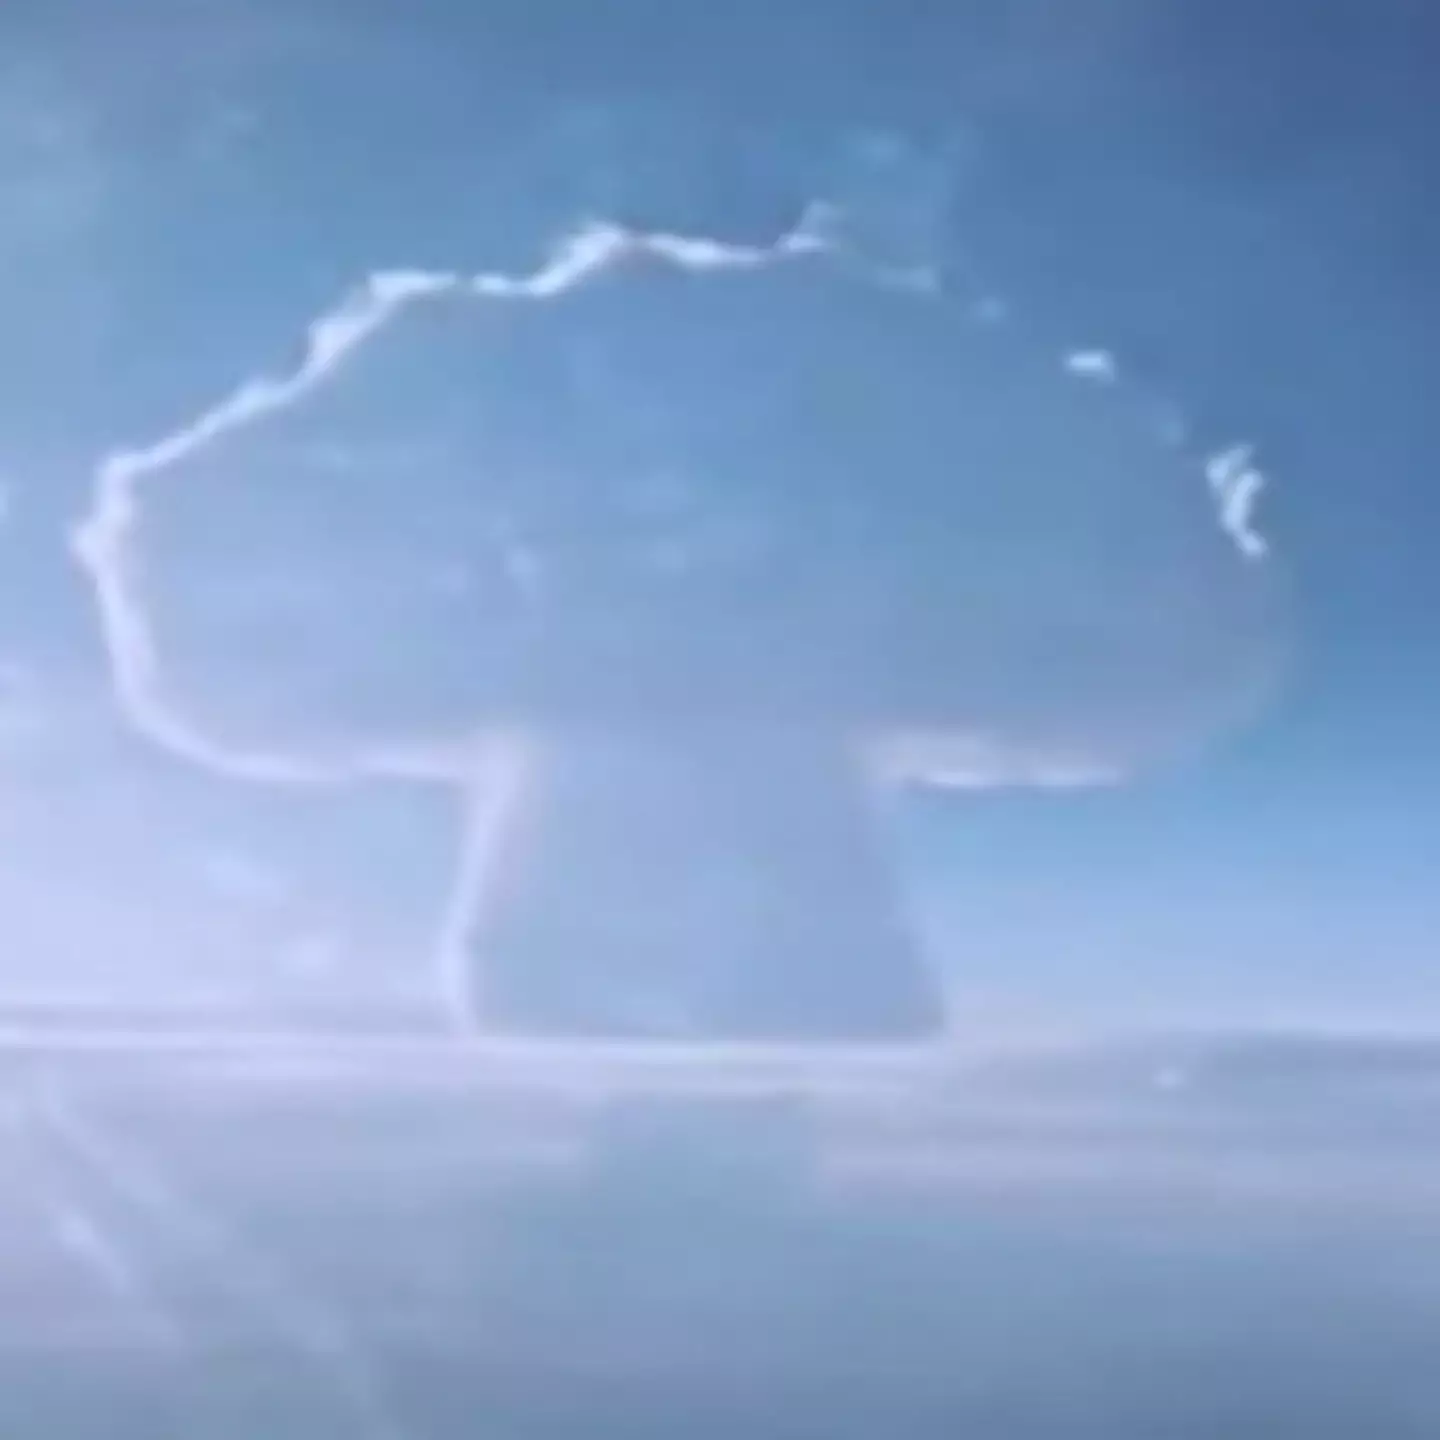 Declassified footage of most powerful nuclear bomb ever detonated was top secret for decades